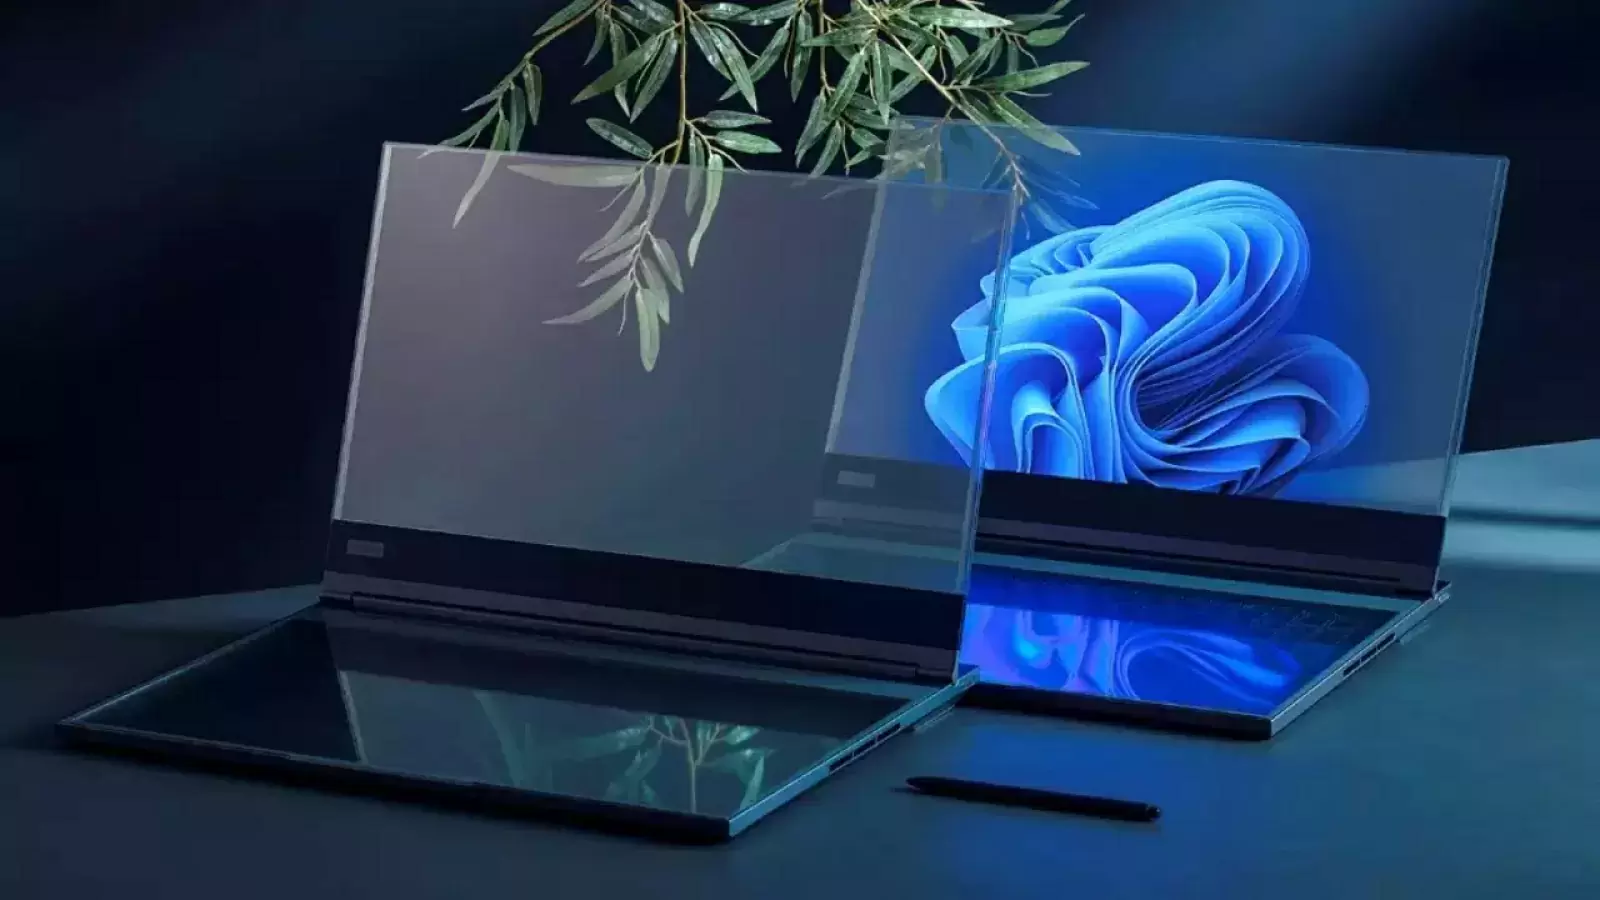 Transparent laptop from Lenovo might be unveiled at MWC 202; Know more